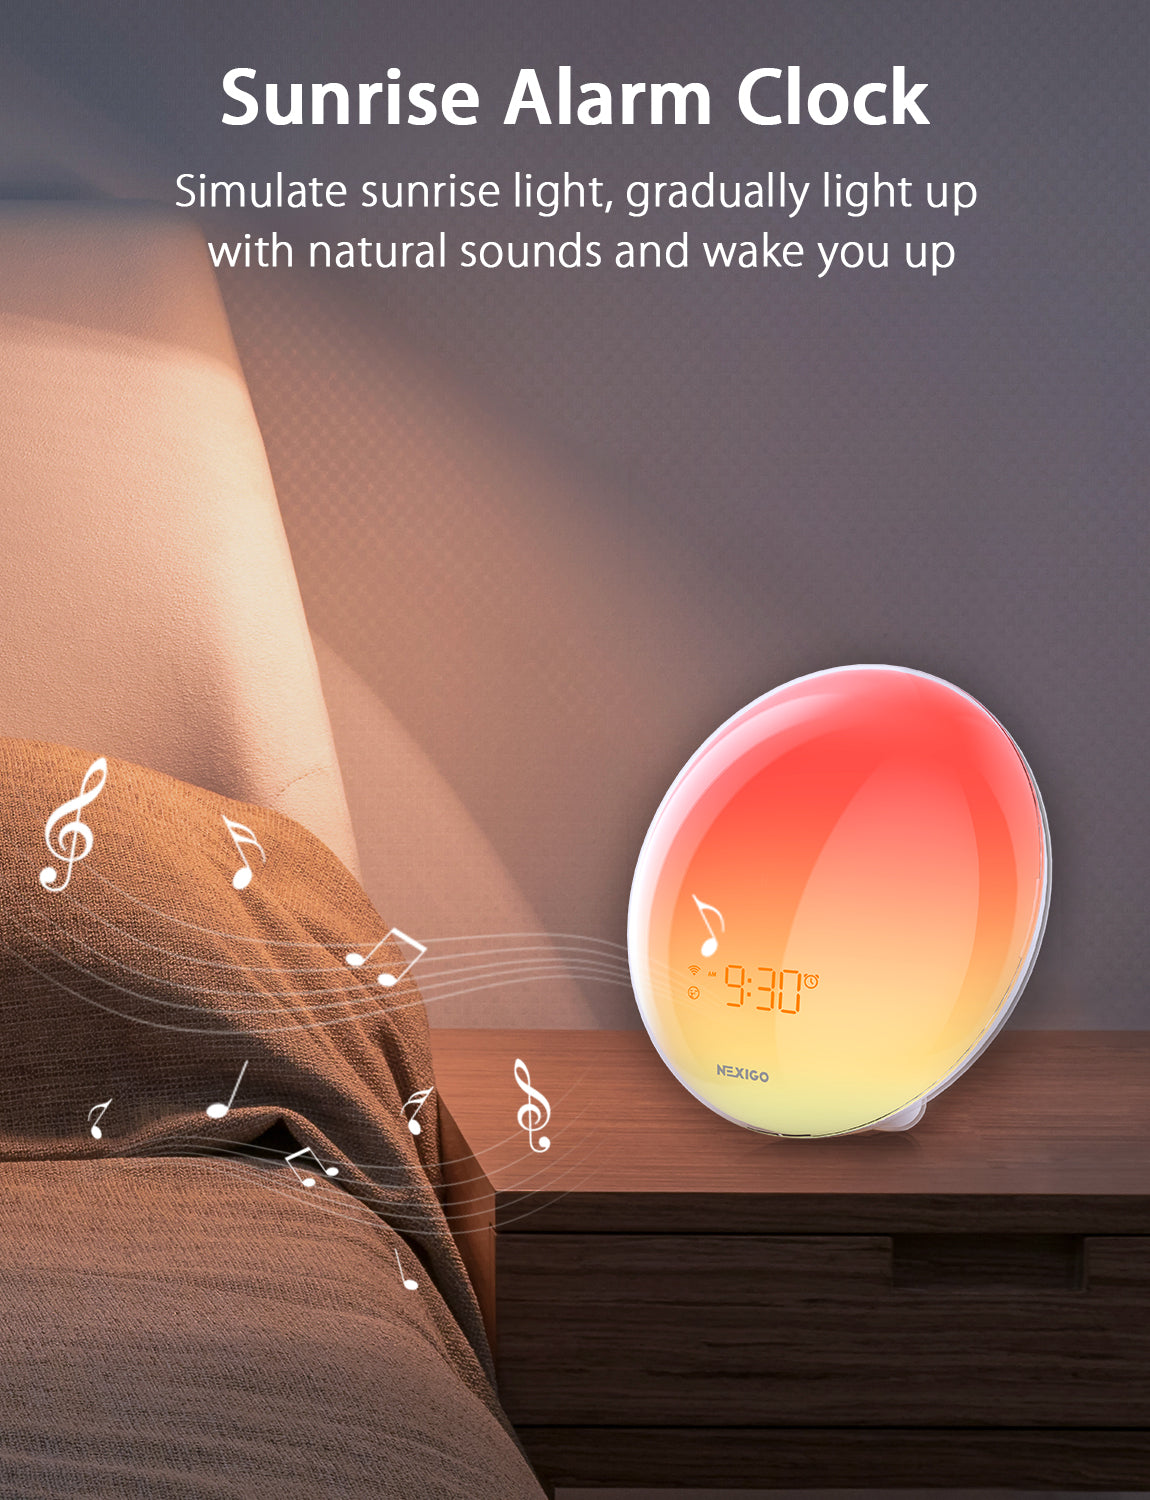 Sunrise alarm clock with natural sounds wakes you up with simulated sunrise light.